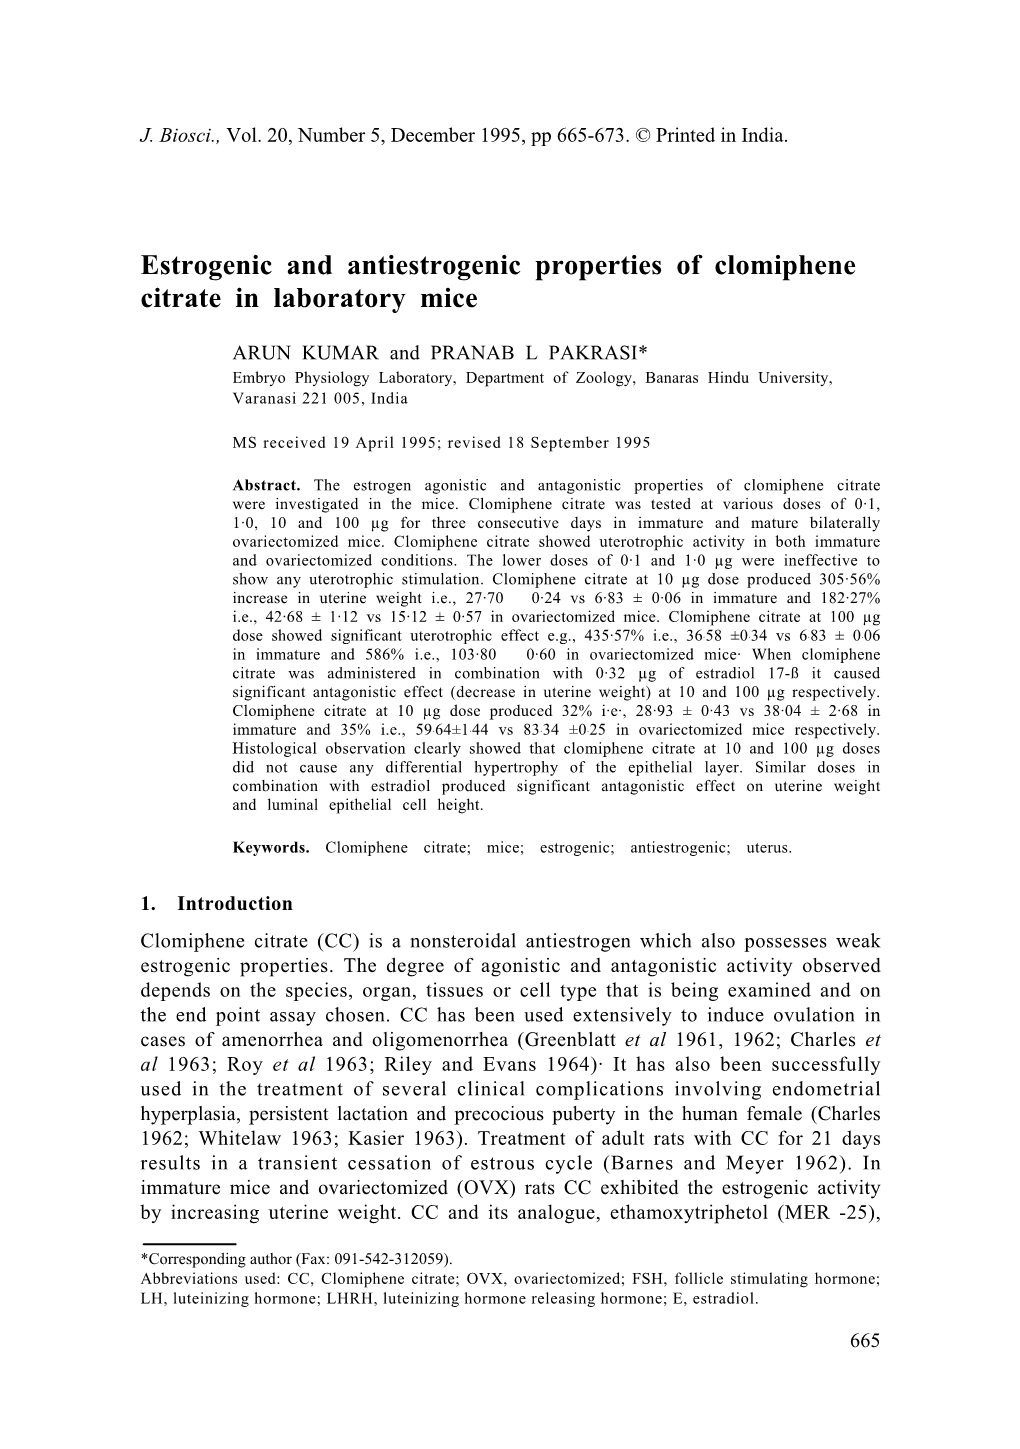 Estrogenic and Antiestrogenic Properties of Clomiphene Citrate in Laboratory Mice